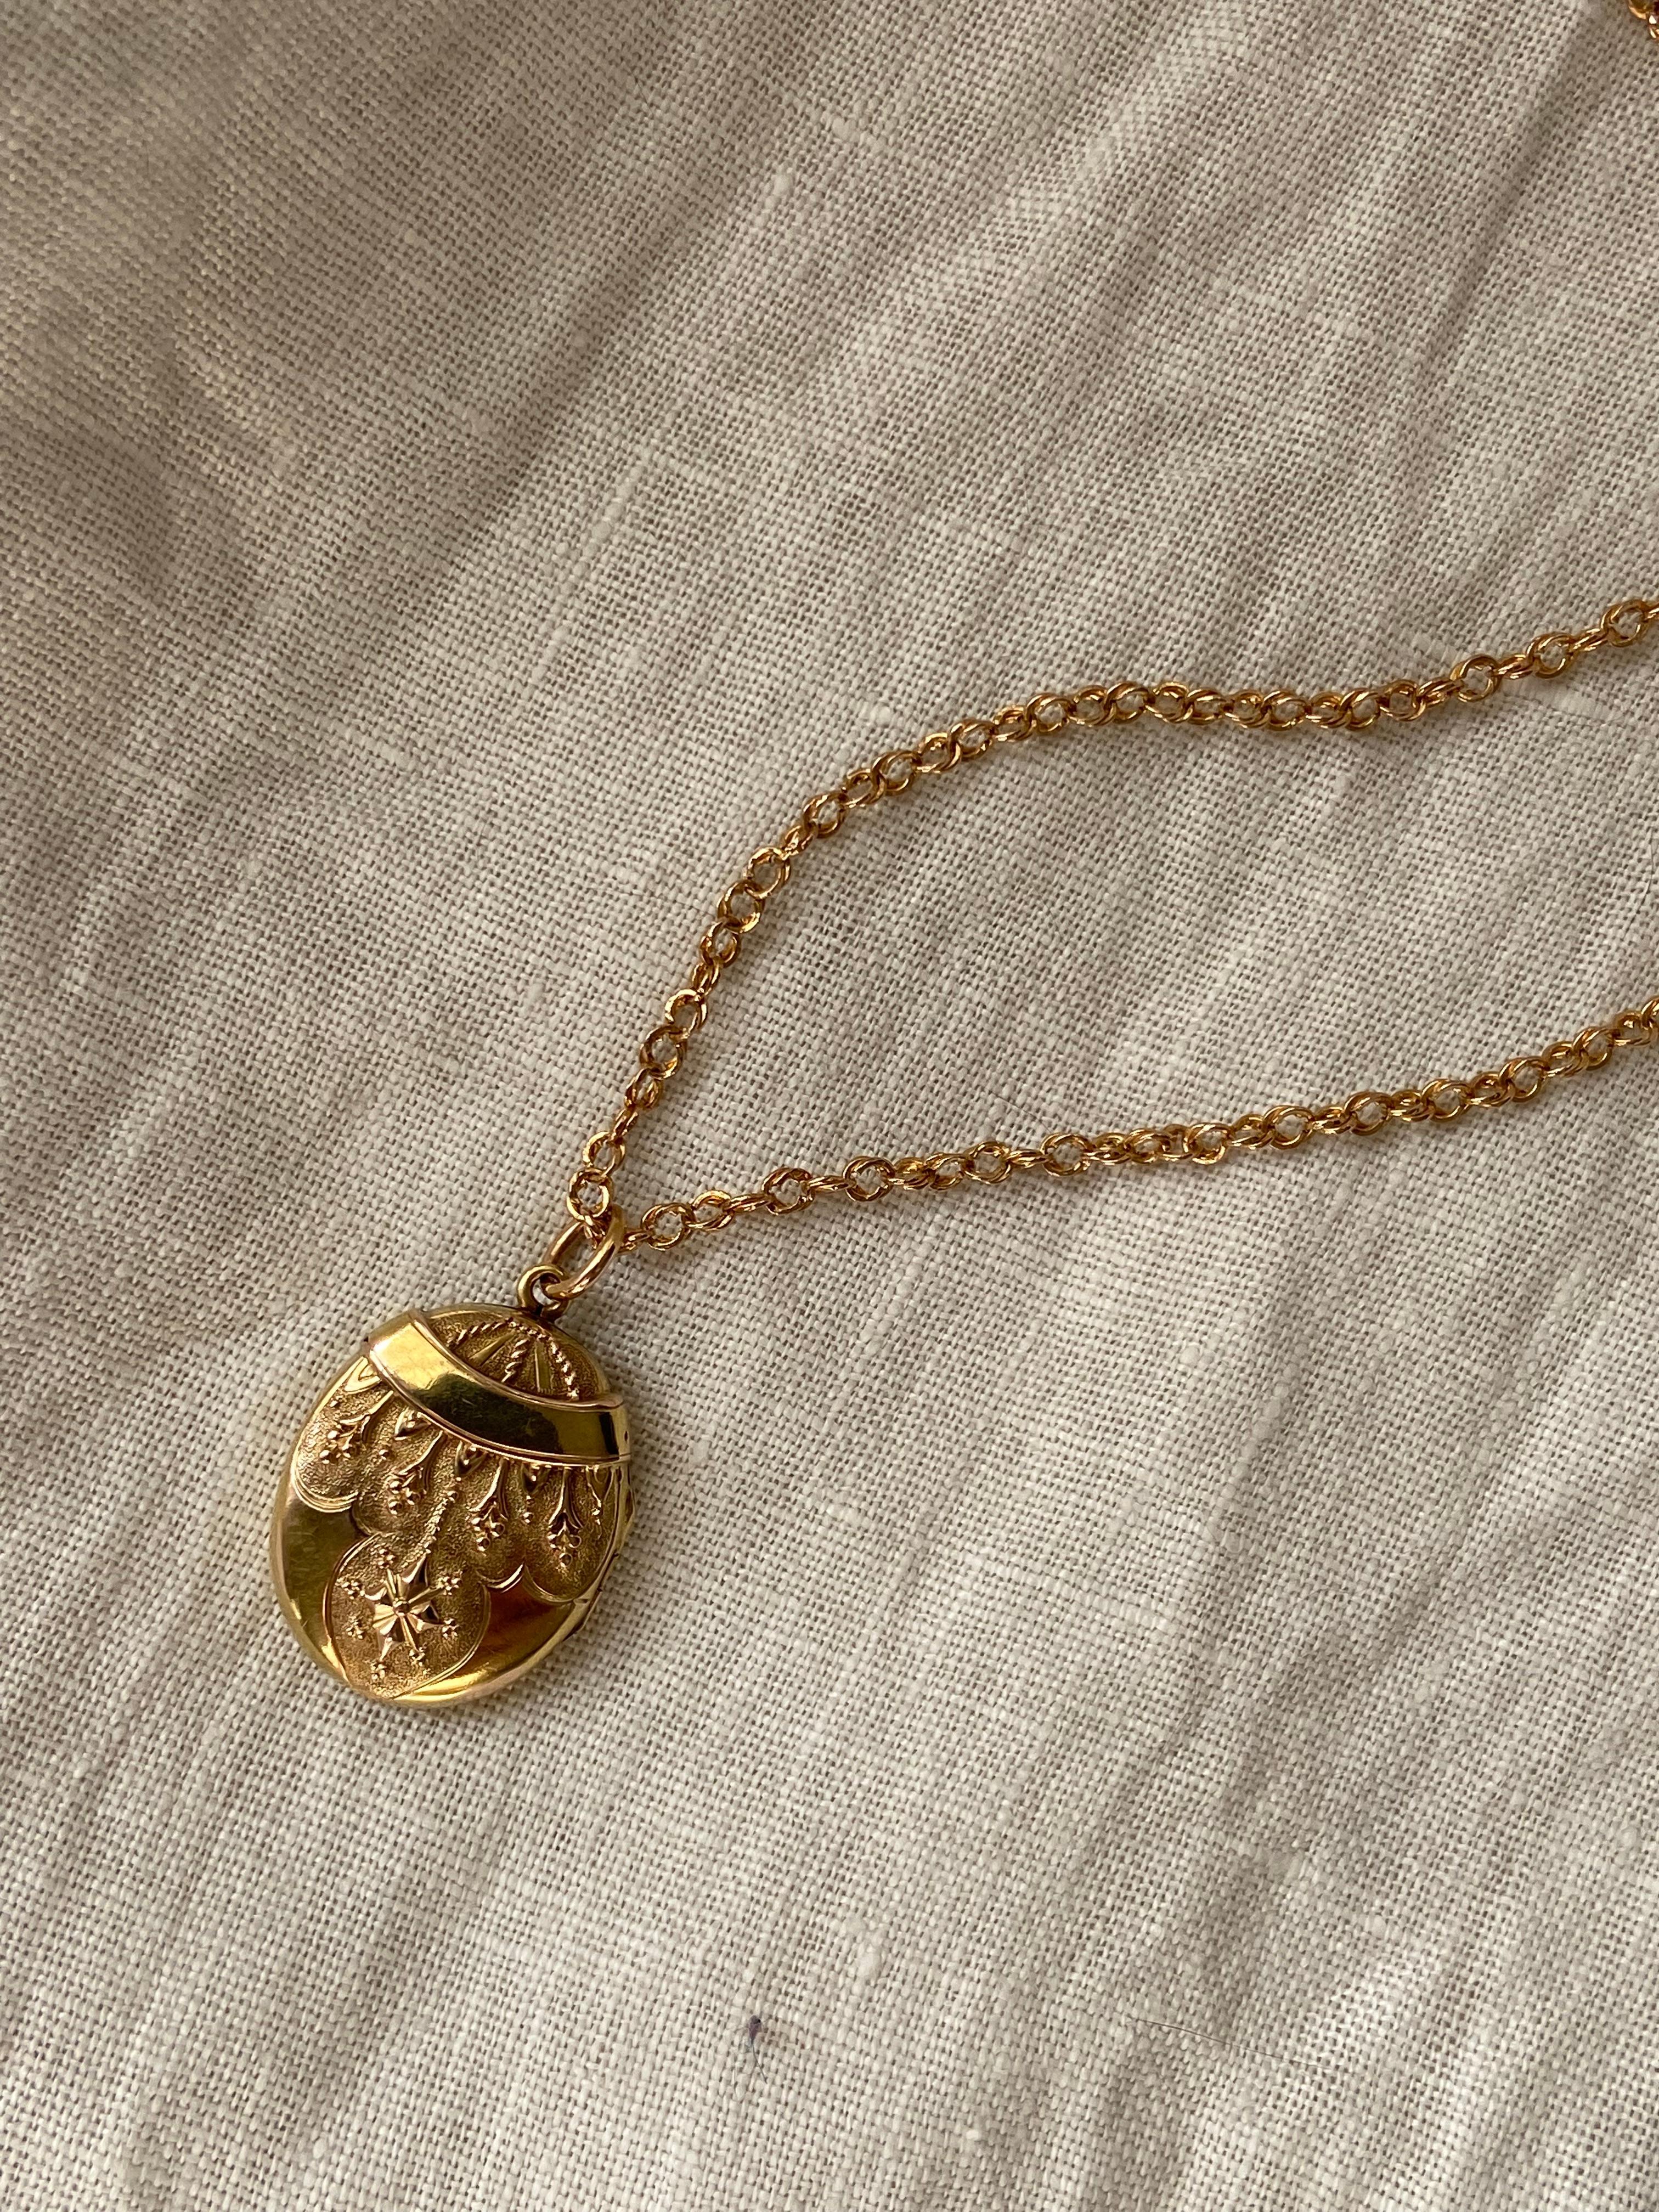 Late Victorian Ornate Oval Locket with Chain 9ct Gold  In Fair Condition For Sale In London, GB